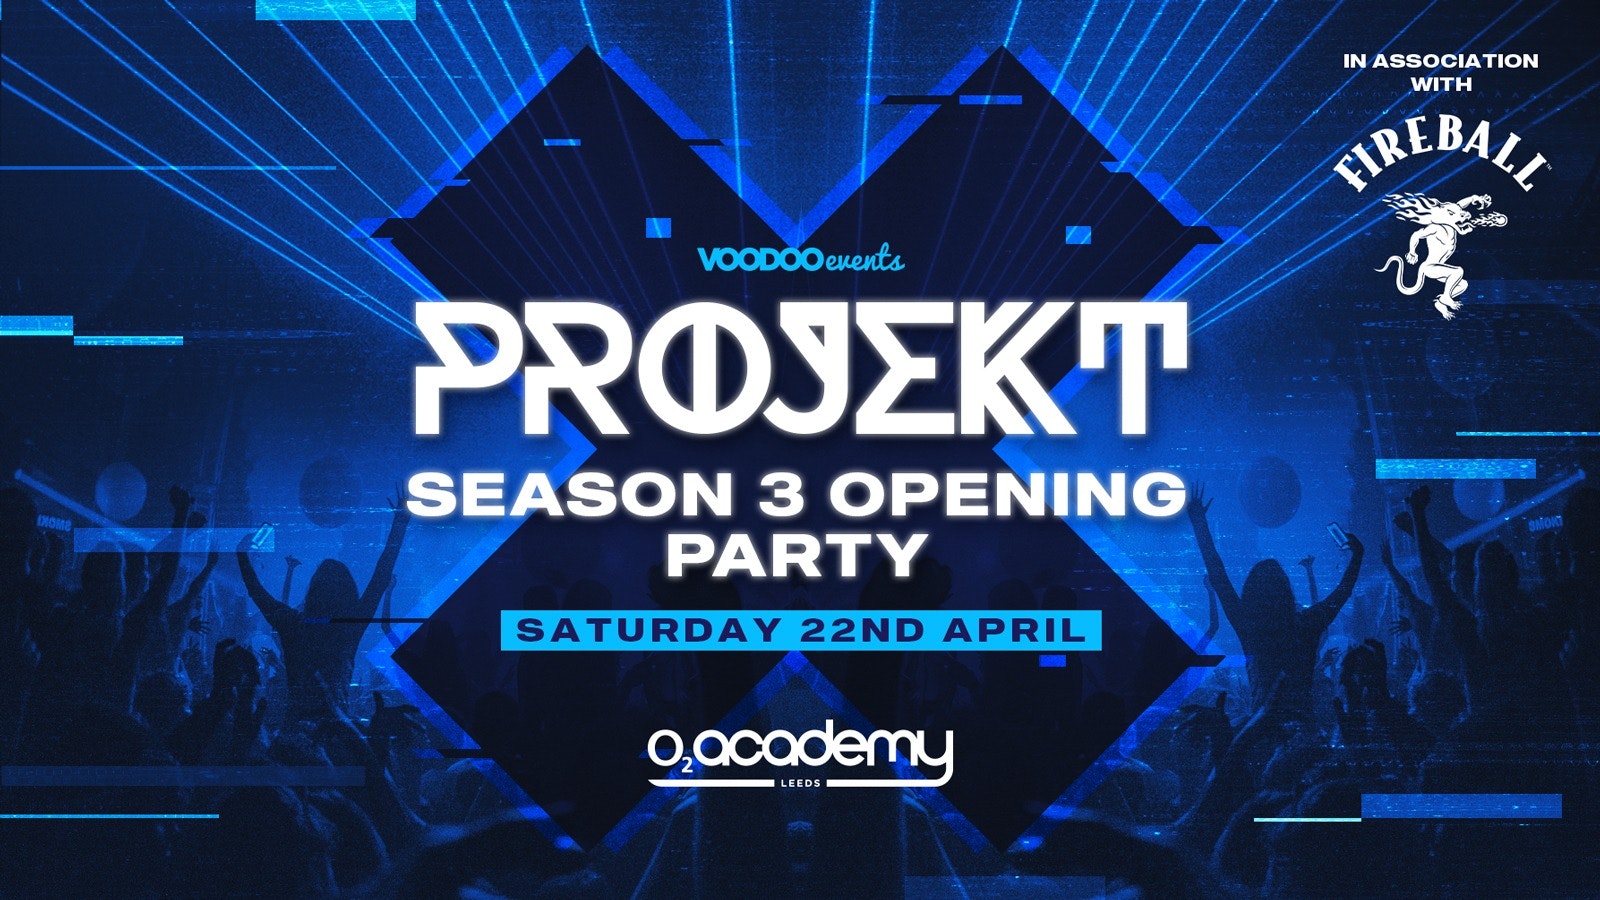 PROJEKT – Saturdays at O2 Academy – Season 3 Opening Party in Association with Fireball